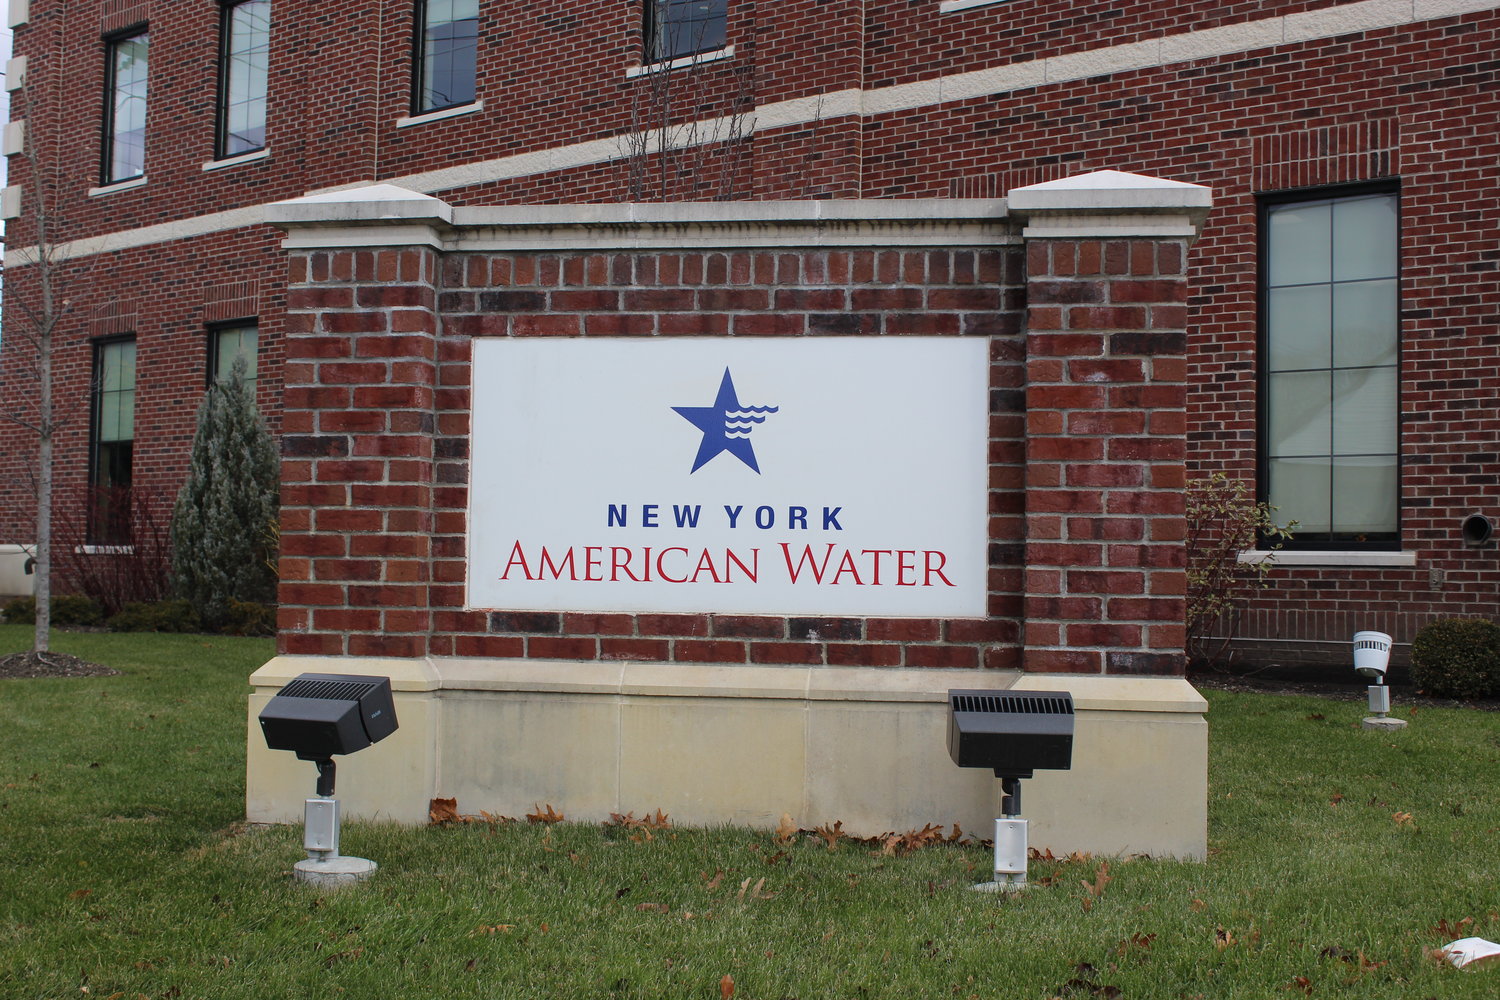 The town of Oyster Bay, the villages of Old Brookville, Roslyn Harbor and Sea Cliff and the City of Glen Cove have until Feb. 1 to appoint members to the advisory board for the new public water authority signed into law on Nov. 3.